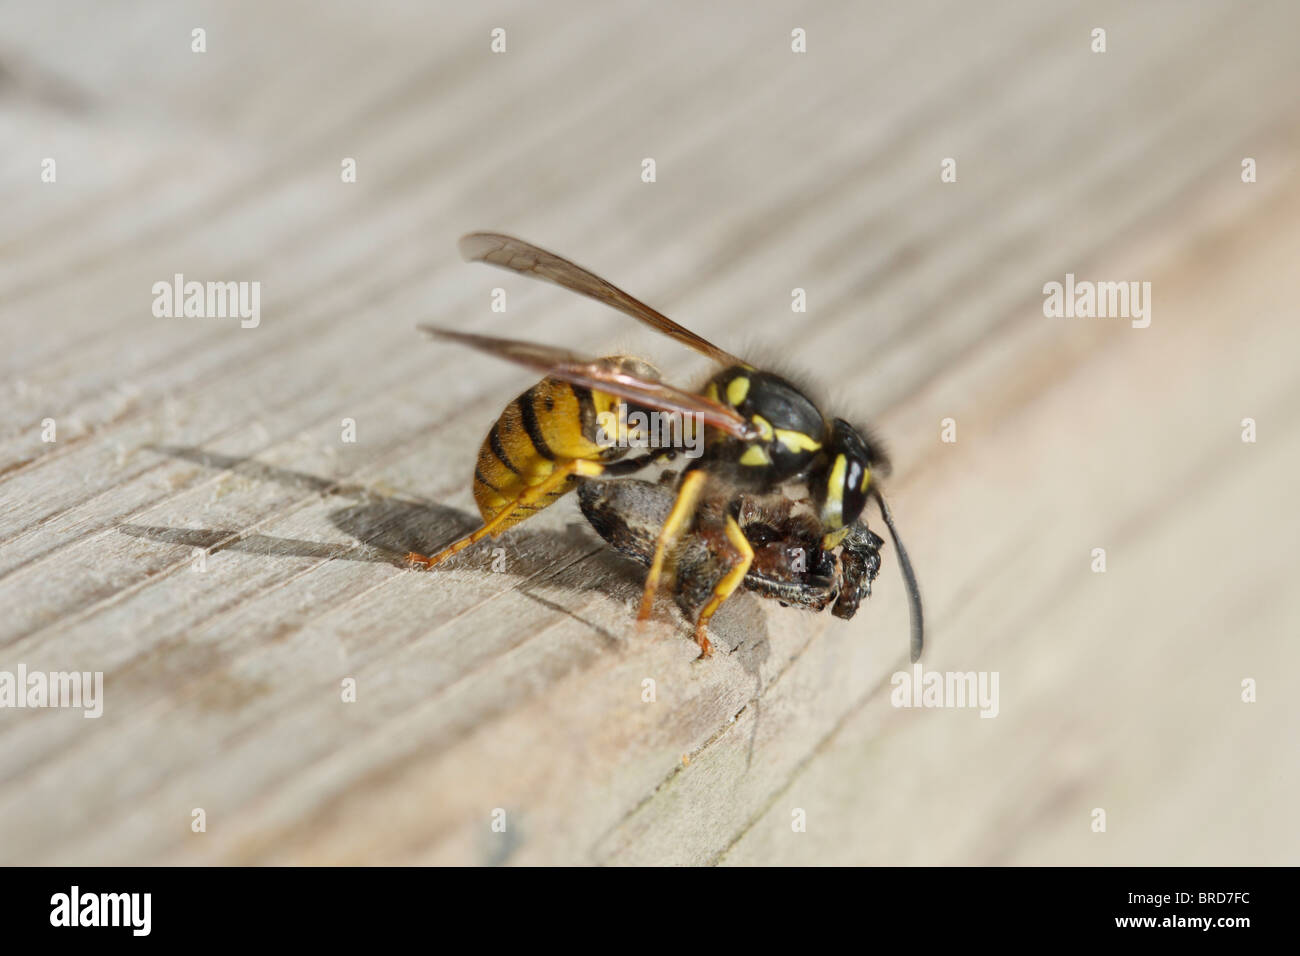 Common Wasp attacking and killing a Fencepost Jumping Spider Stock Photo